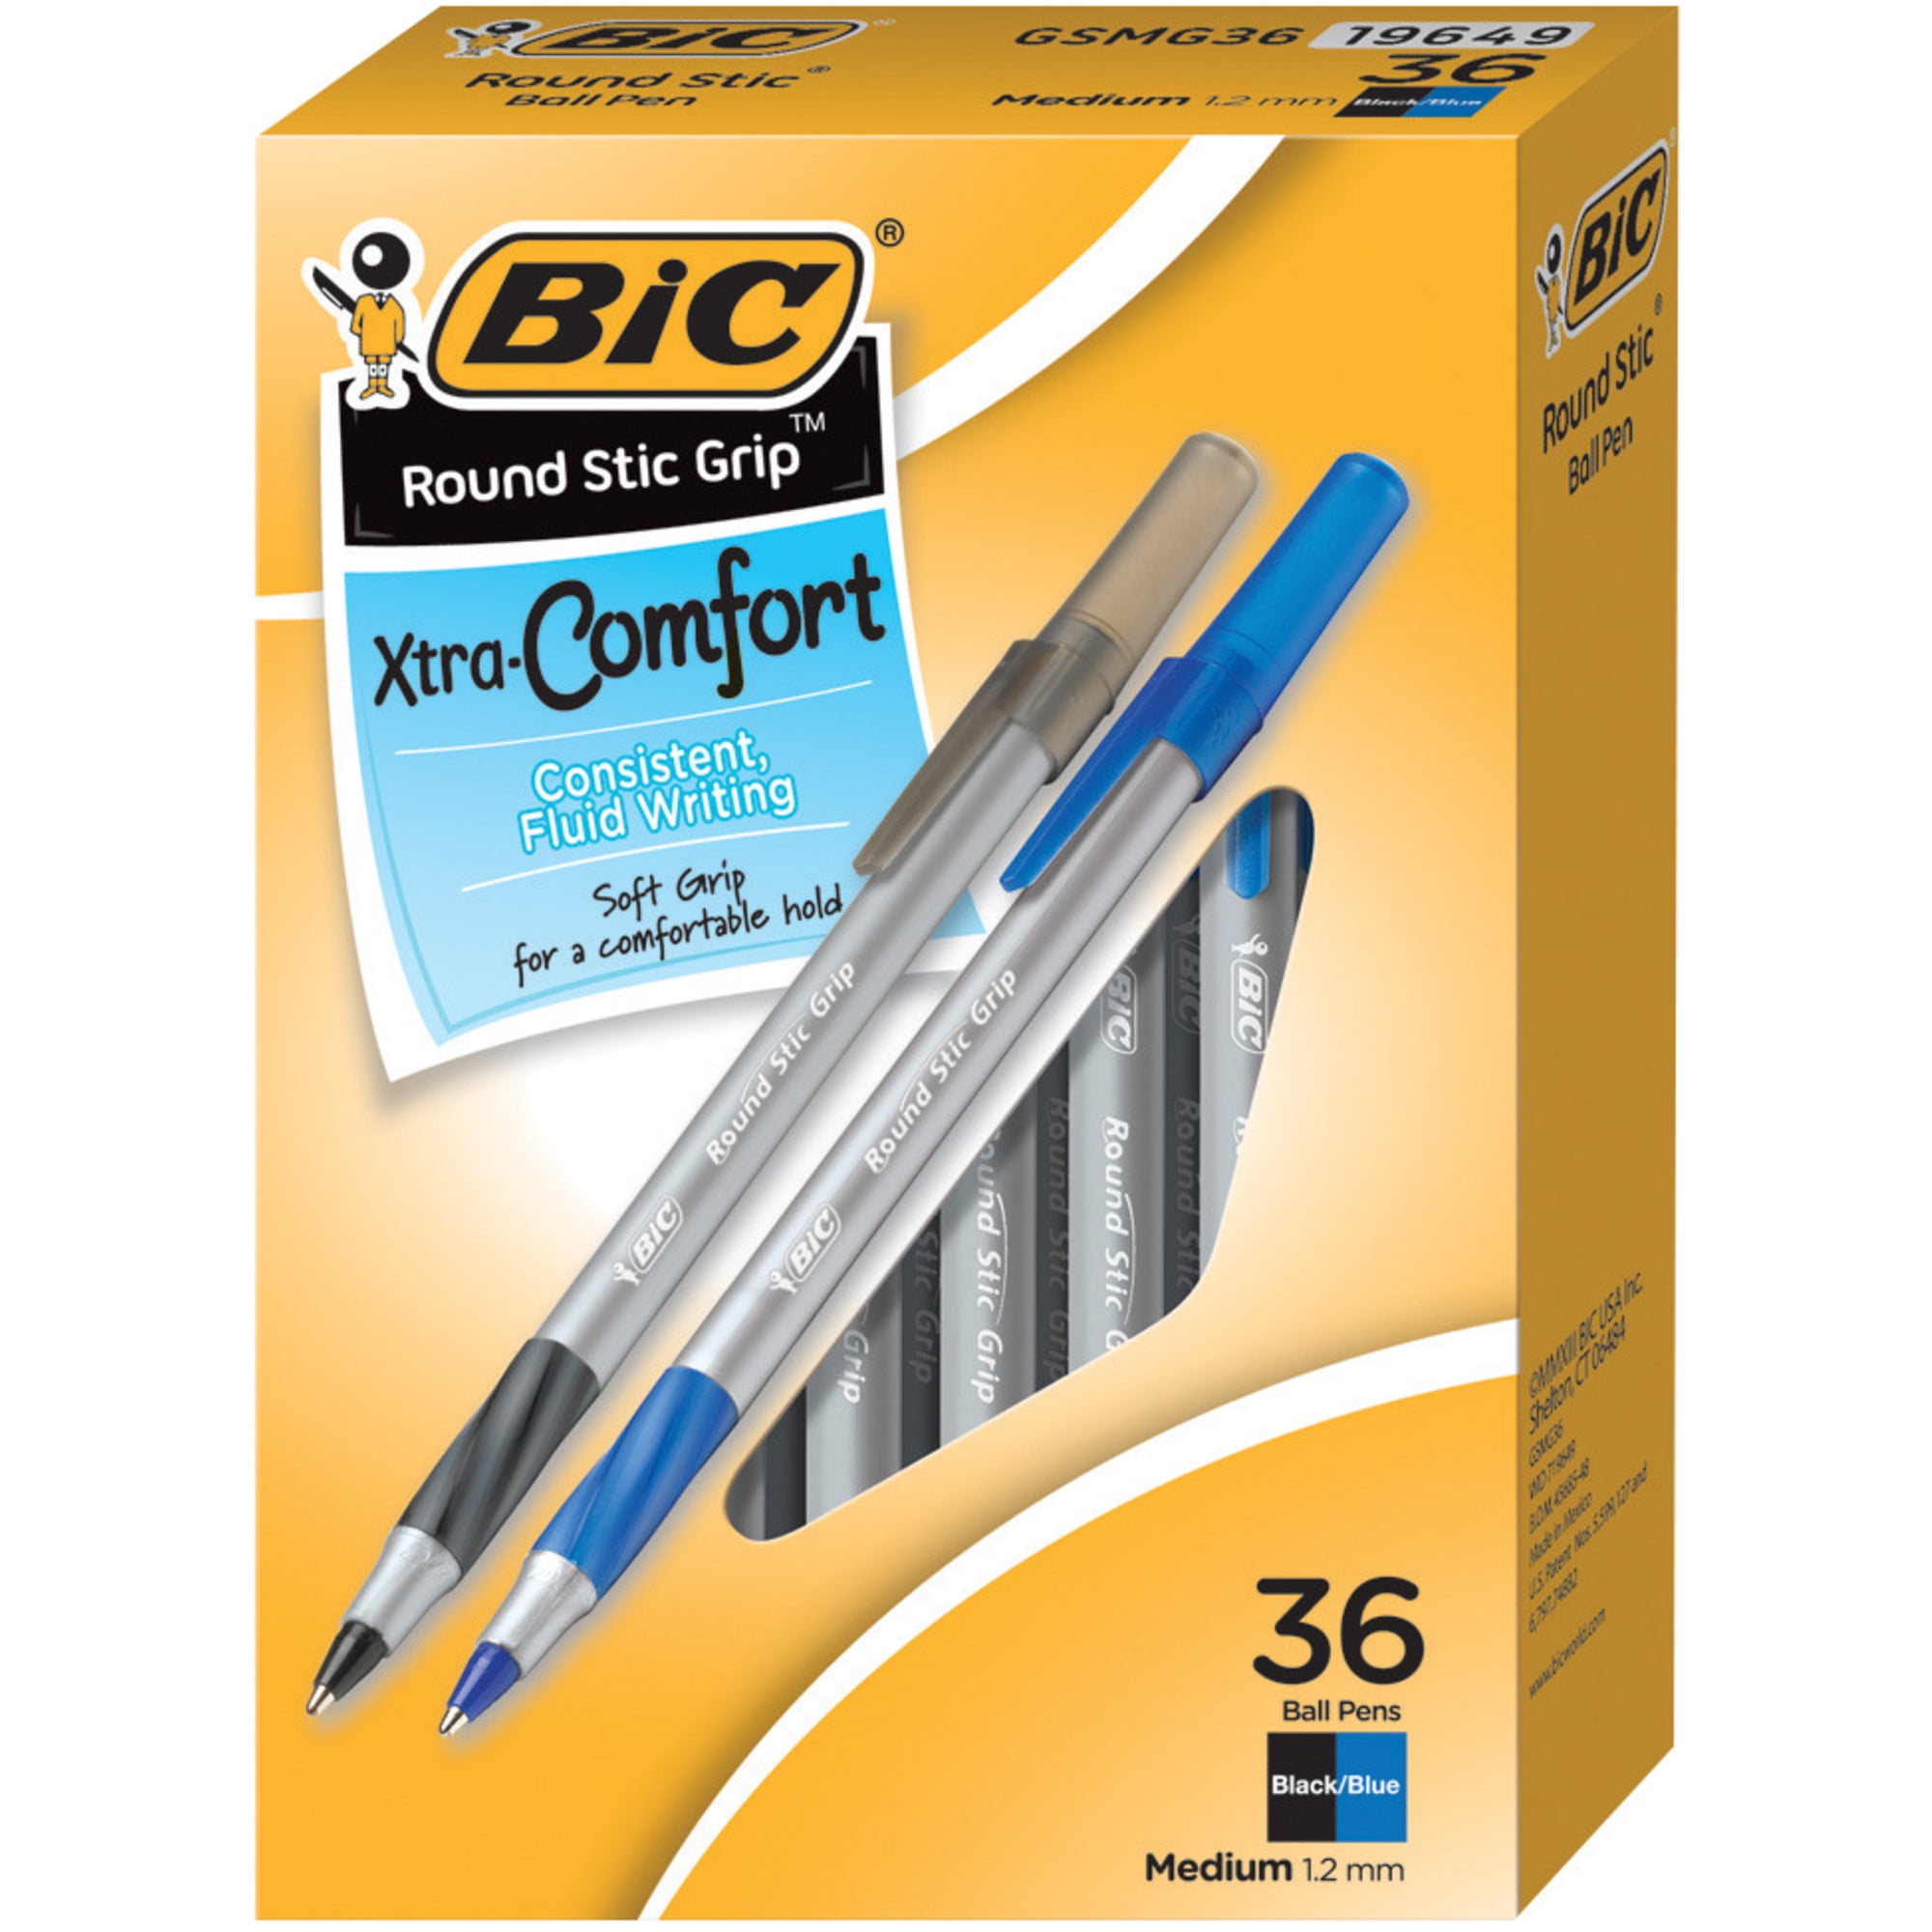 BIC Glide Bold Black Ballpoint Pens, Bold Point (1.6mm), 12-Count